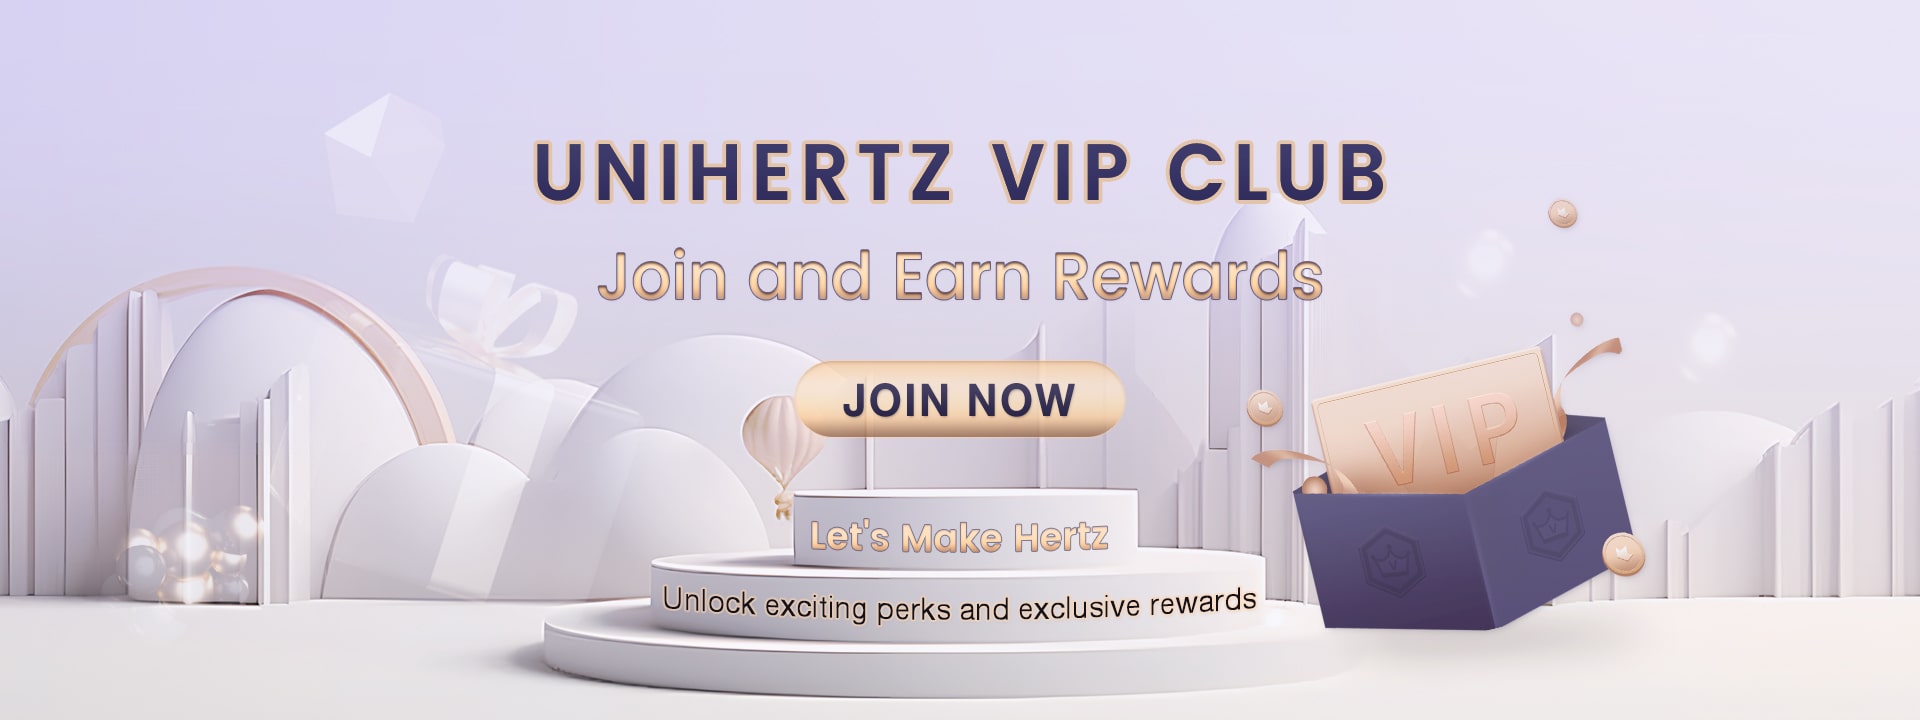 Welcome to Join Unihertz VIP Club